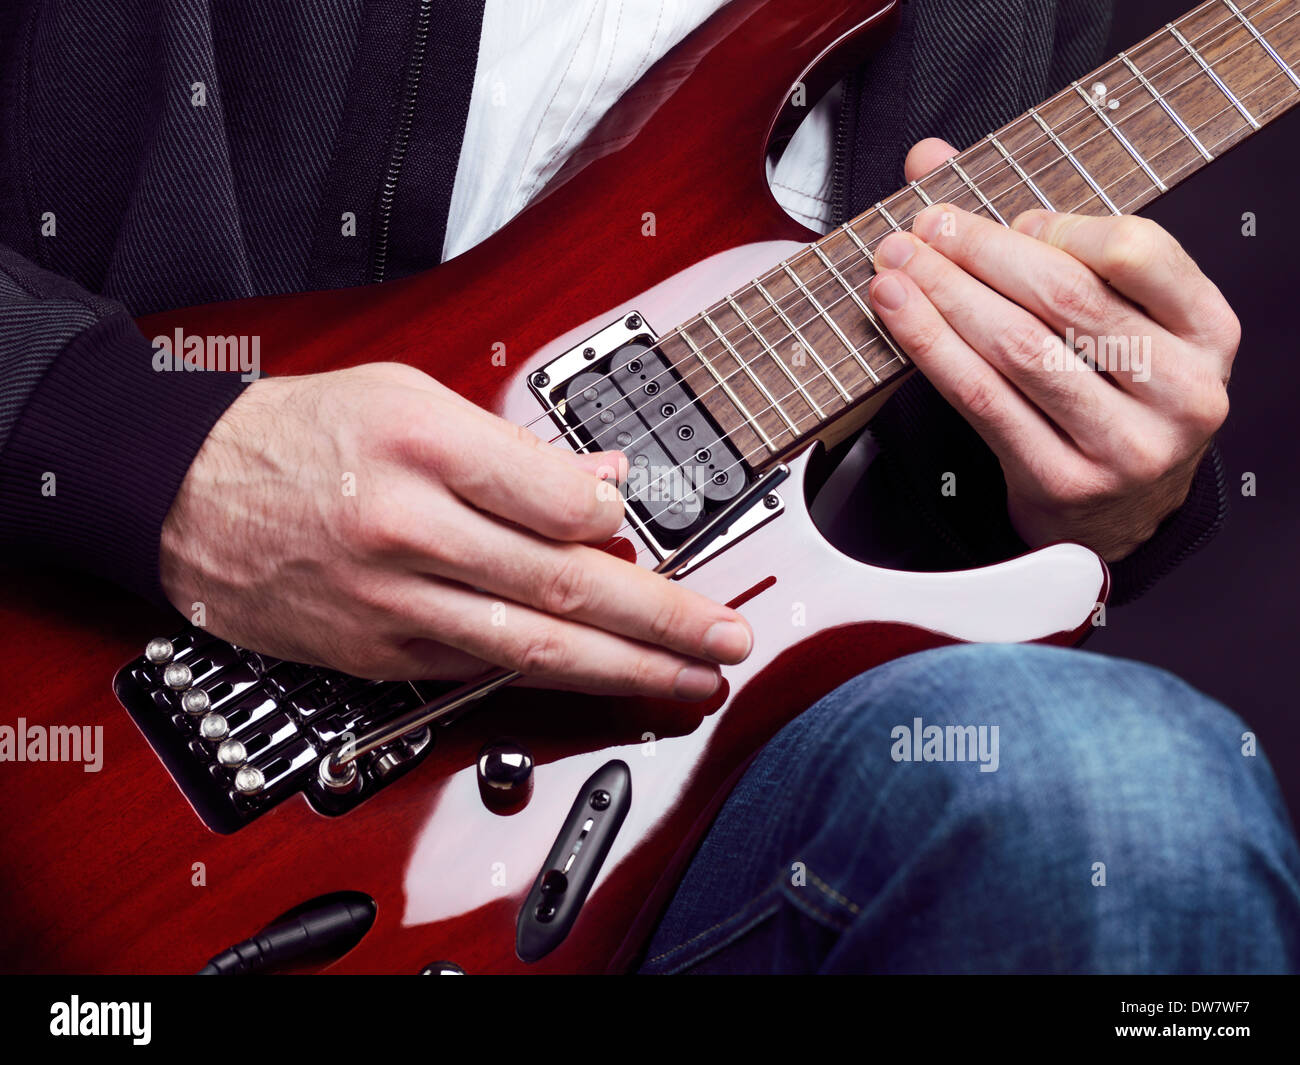 License and prints at MaximImages.com - Closeup of man hands playing red electric guitar Ibanez Stock Photo